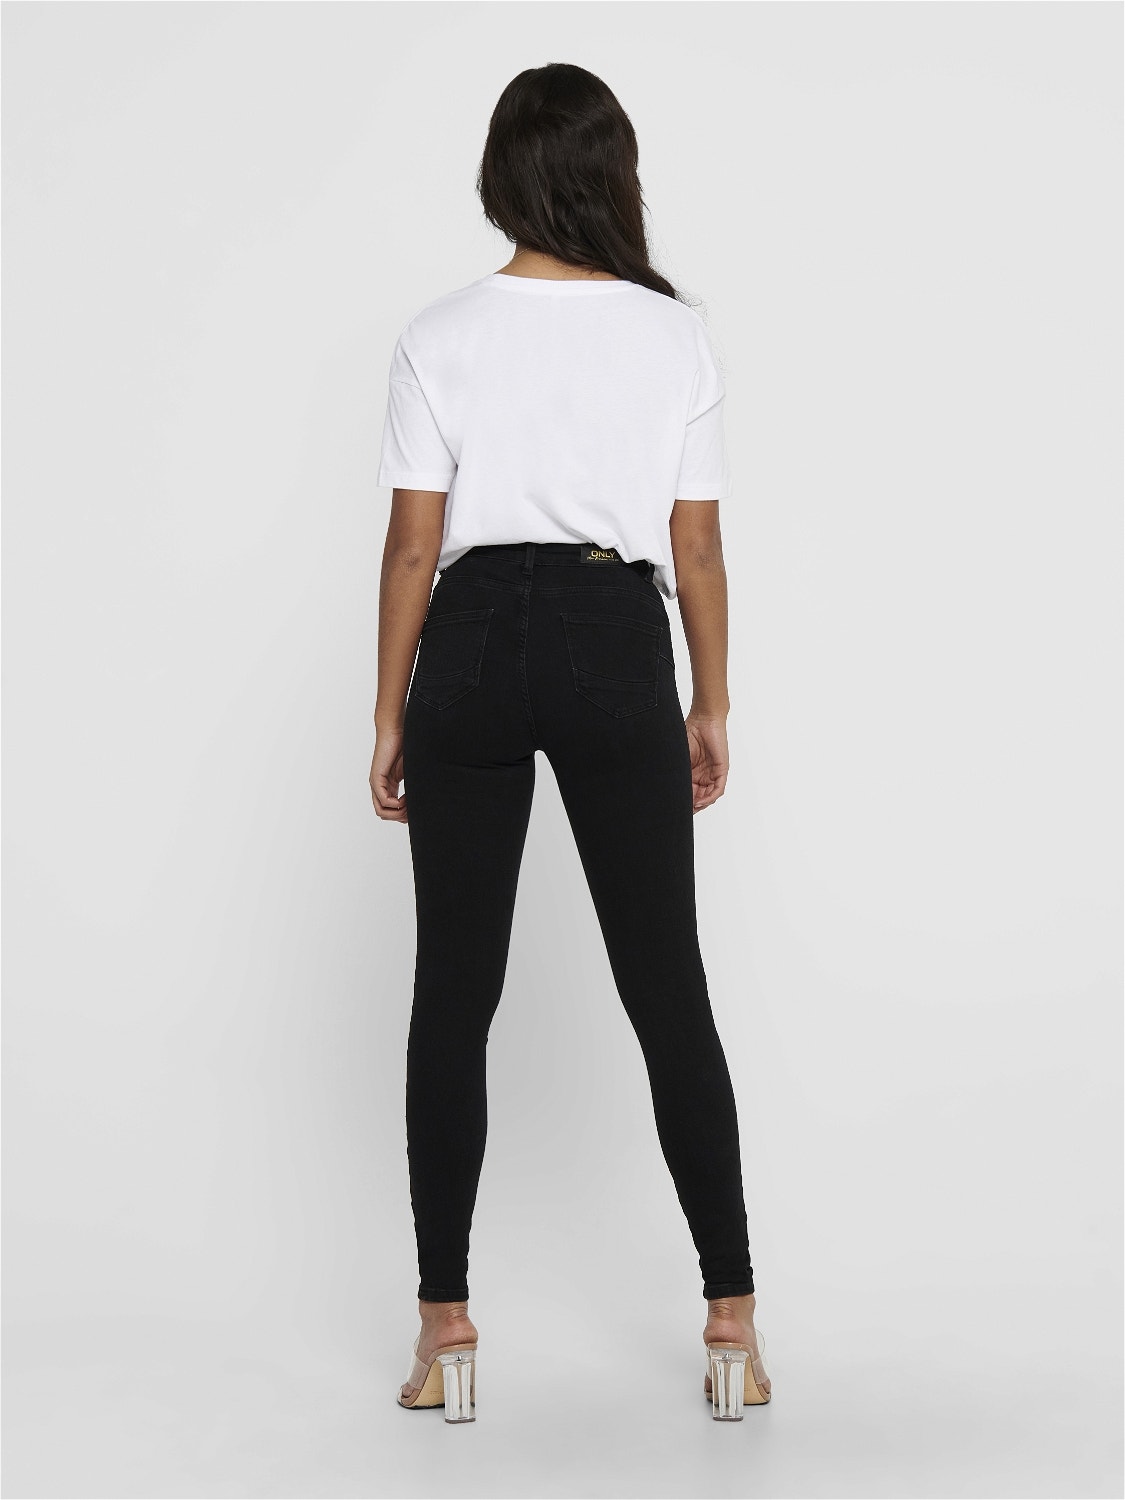 ONLY ONLPower mid push up Skinny fit jeans -Black - 15181958